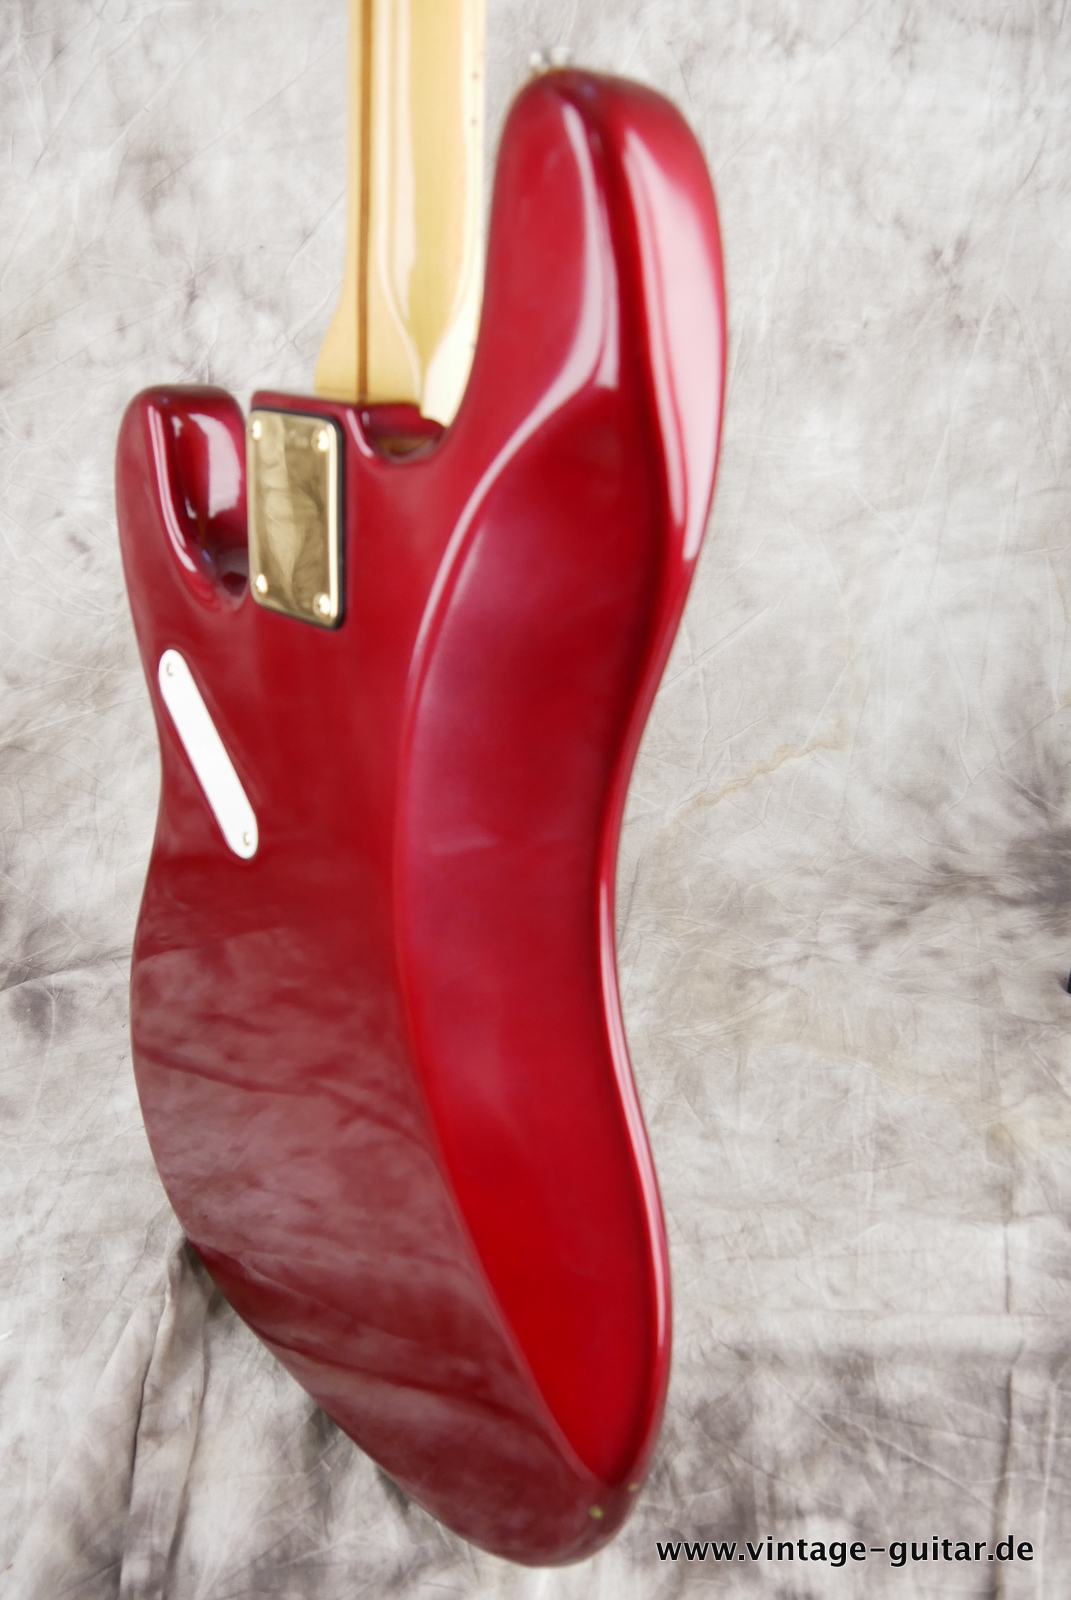 Fender_Precision_Special_USA_candy_apple_red_1982-008.JPG